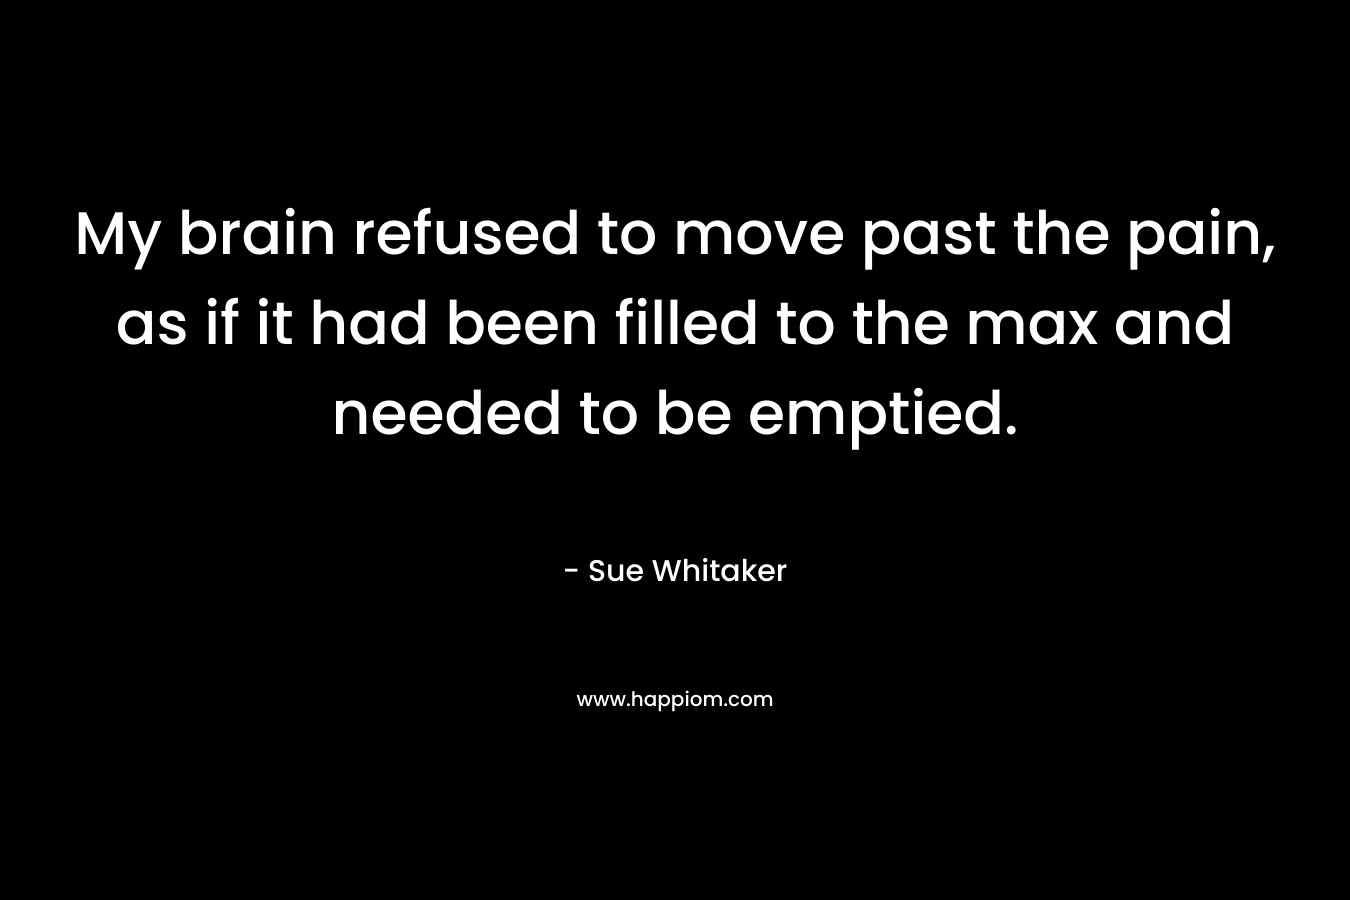 My brain refused to move past the pain, as if it had been filled to the max and needed to be emptied.